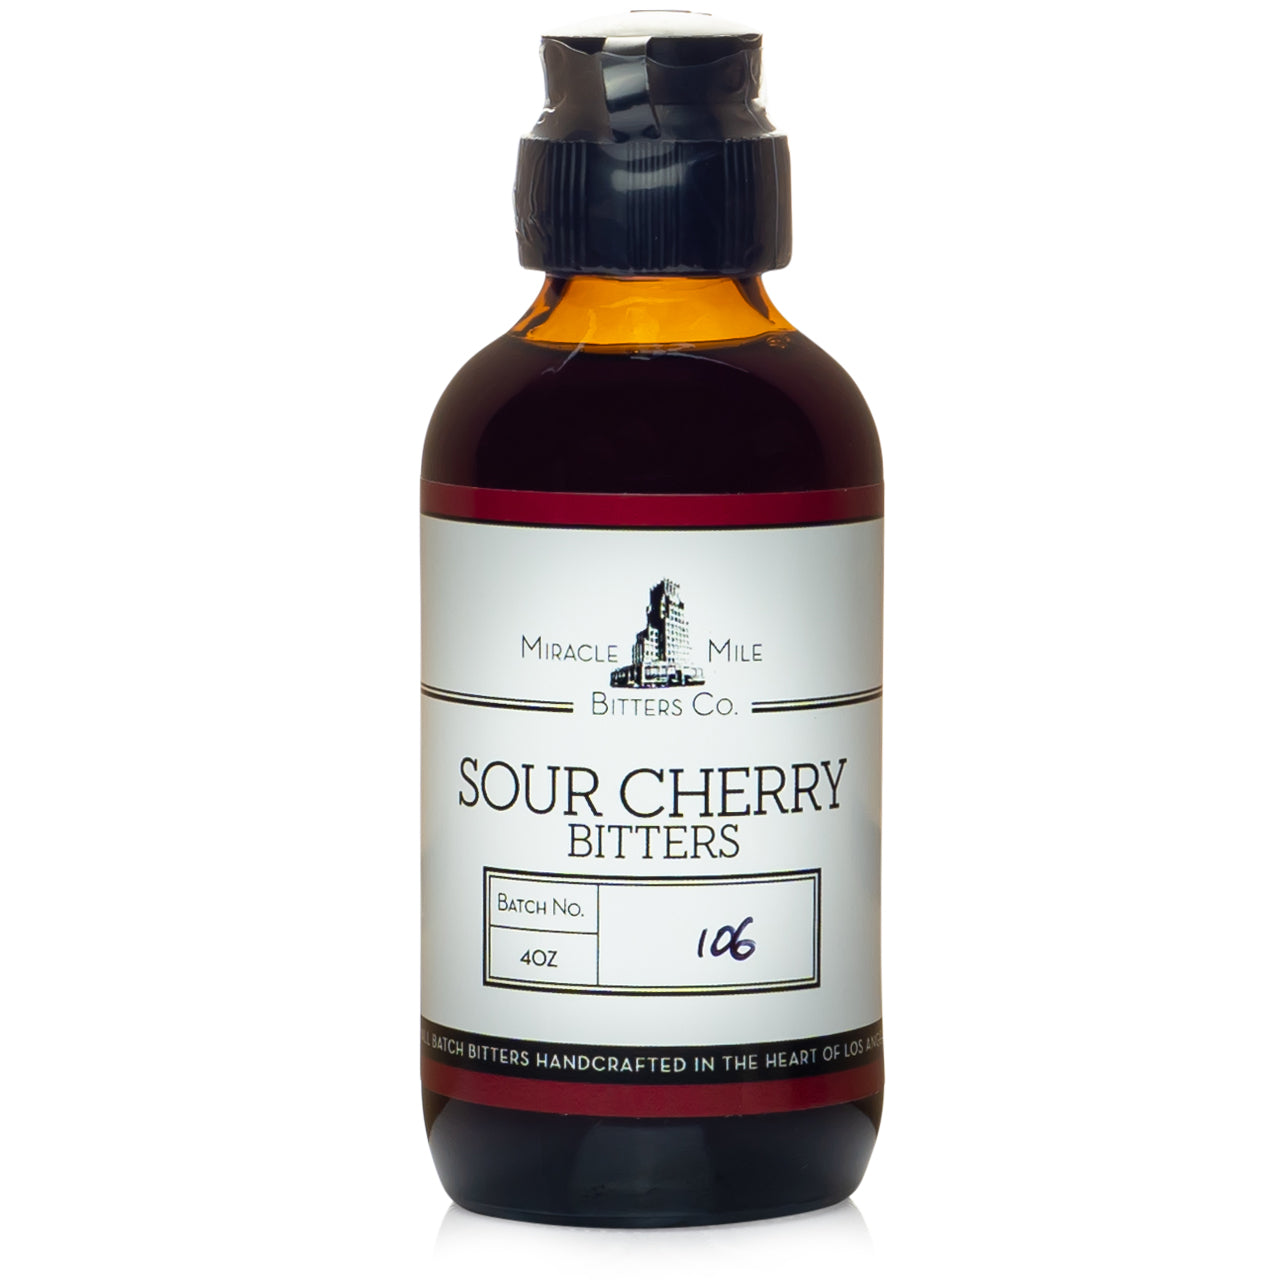 Miracle Mile Sour Cherry Bitters